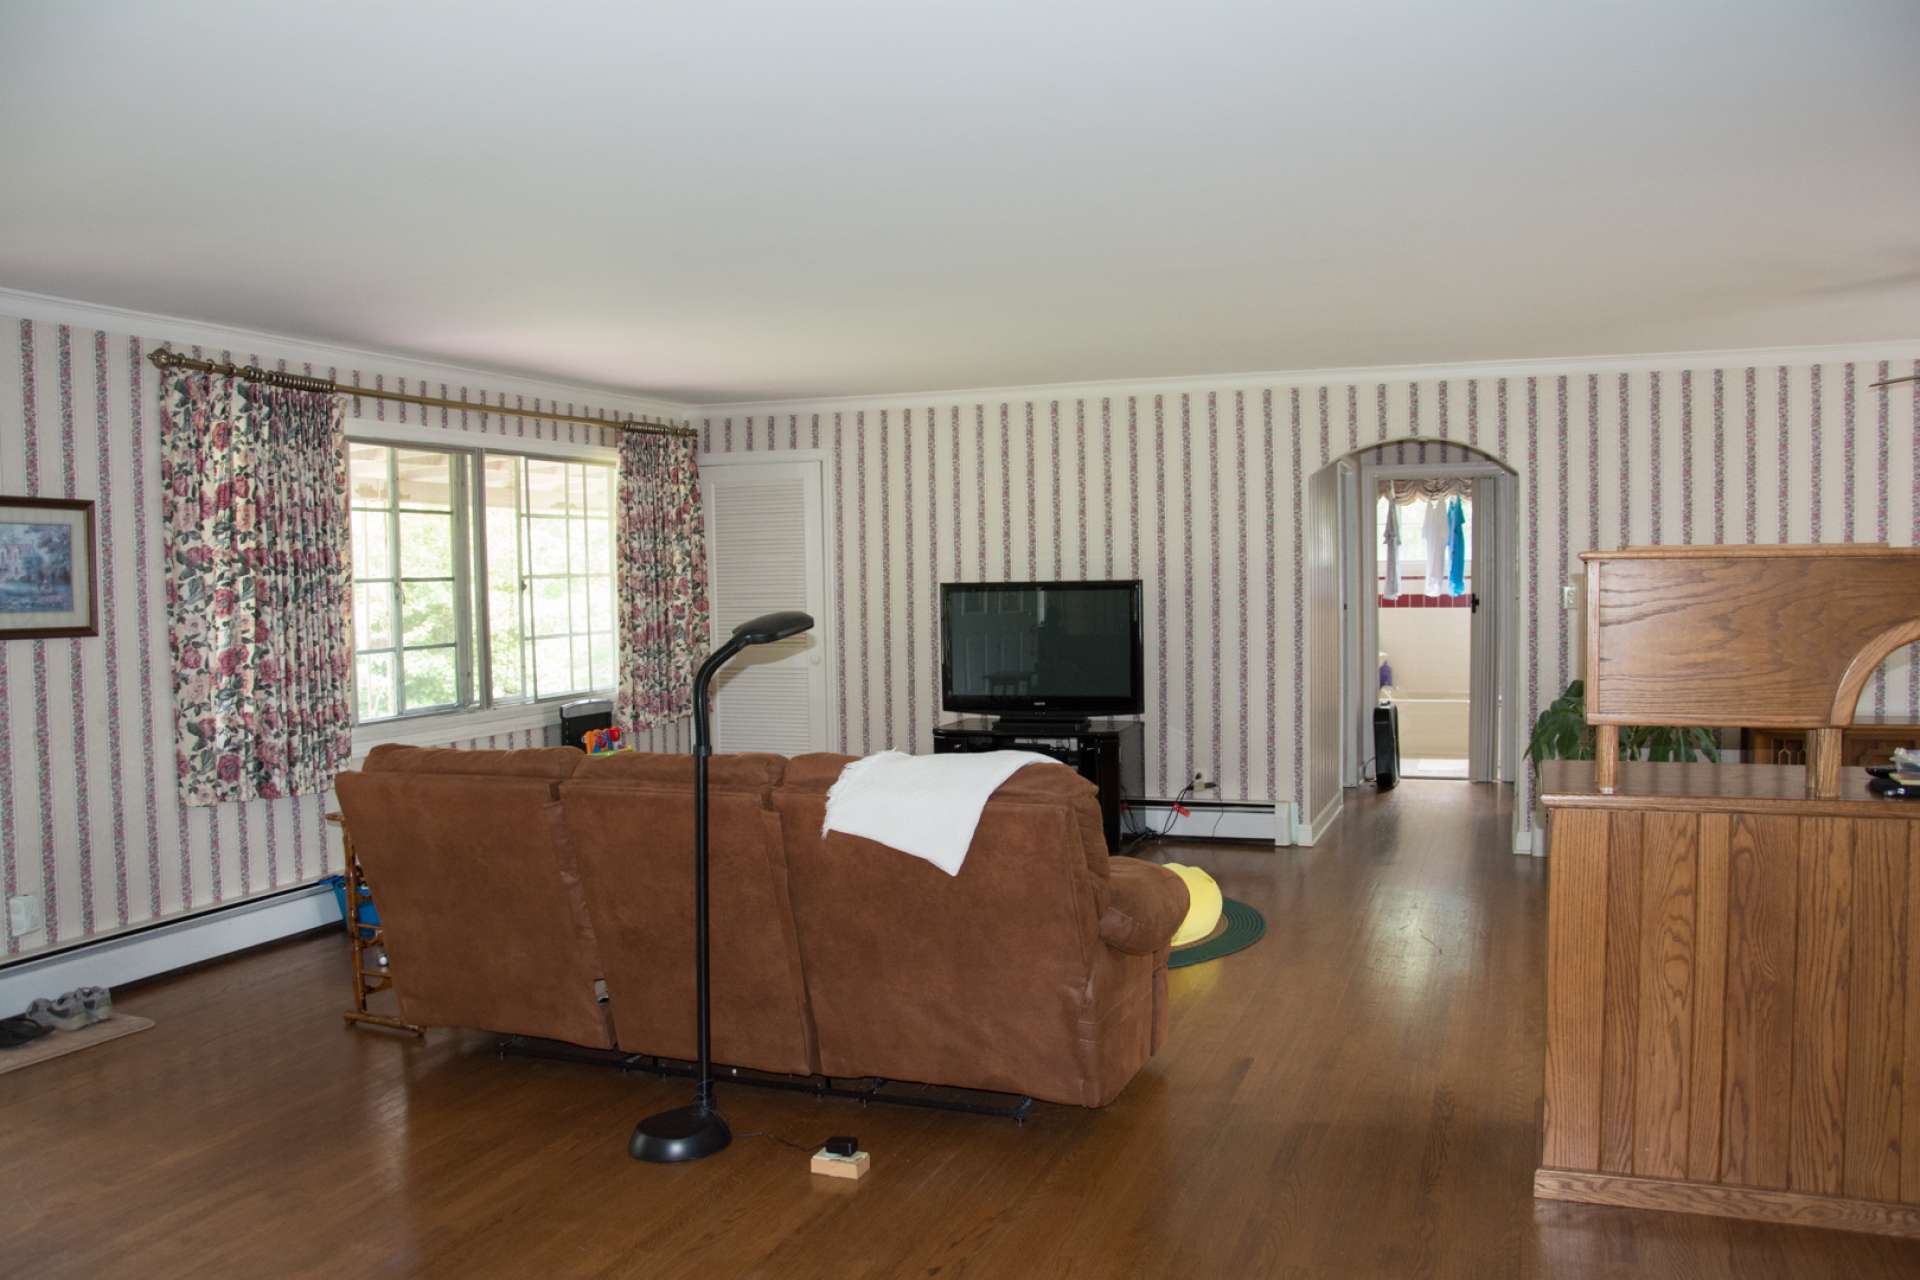 The main level offers a spacious living area with hardwood floors and a wood-burning fireplace.